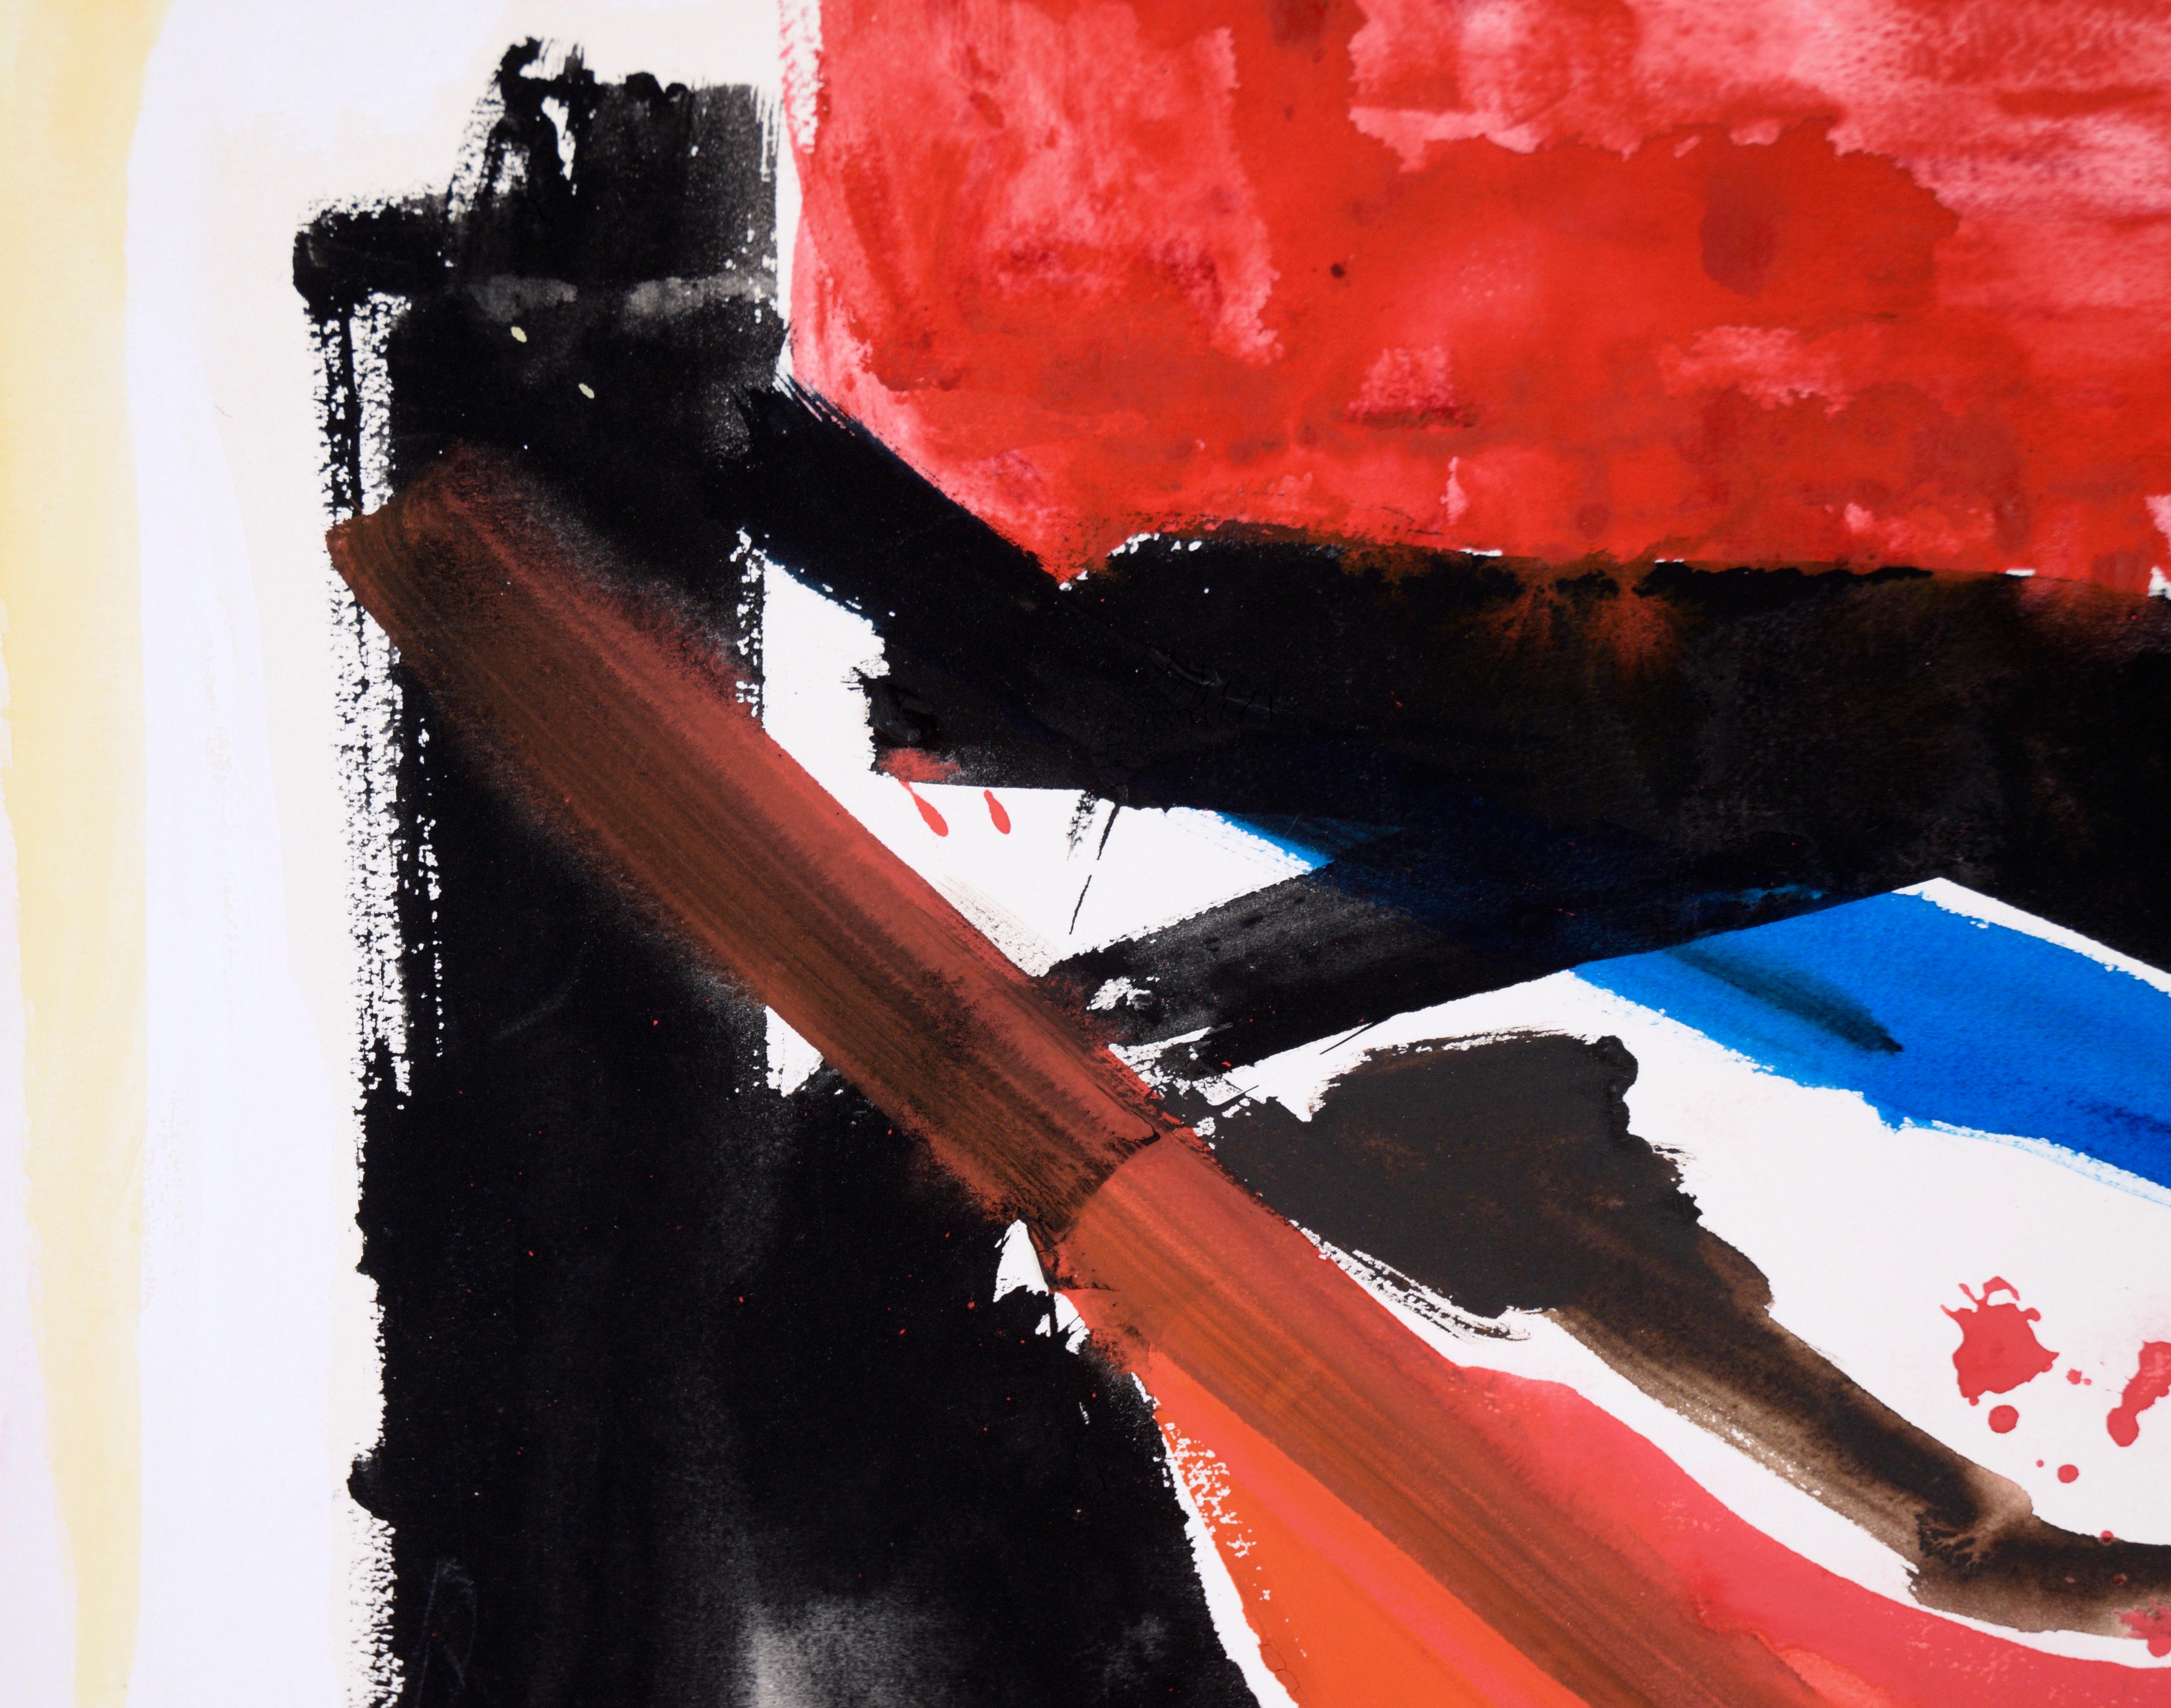 Black, Orange, and Blue Abstract Expressionist Composition in Acrylic on Paper - Painting by Ricardo de Silva